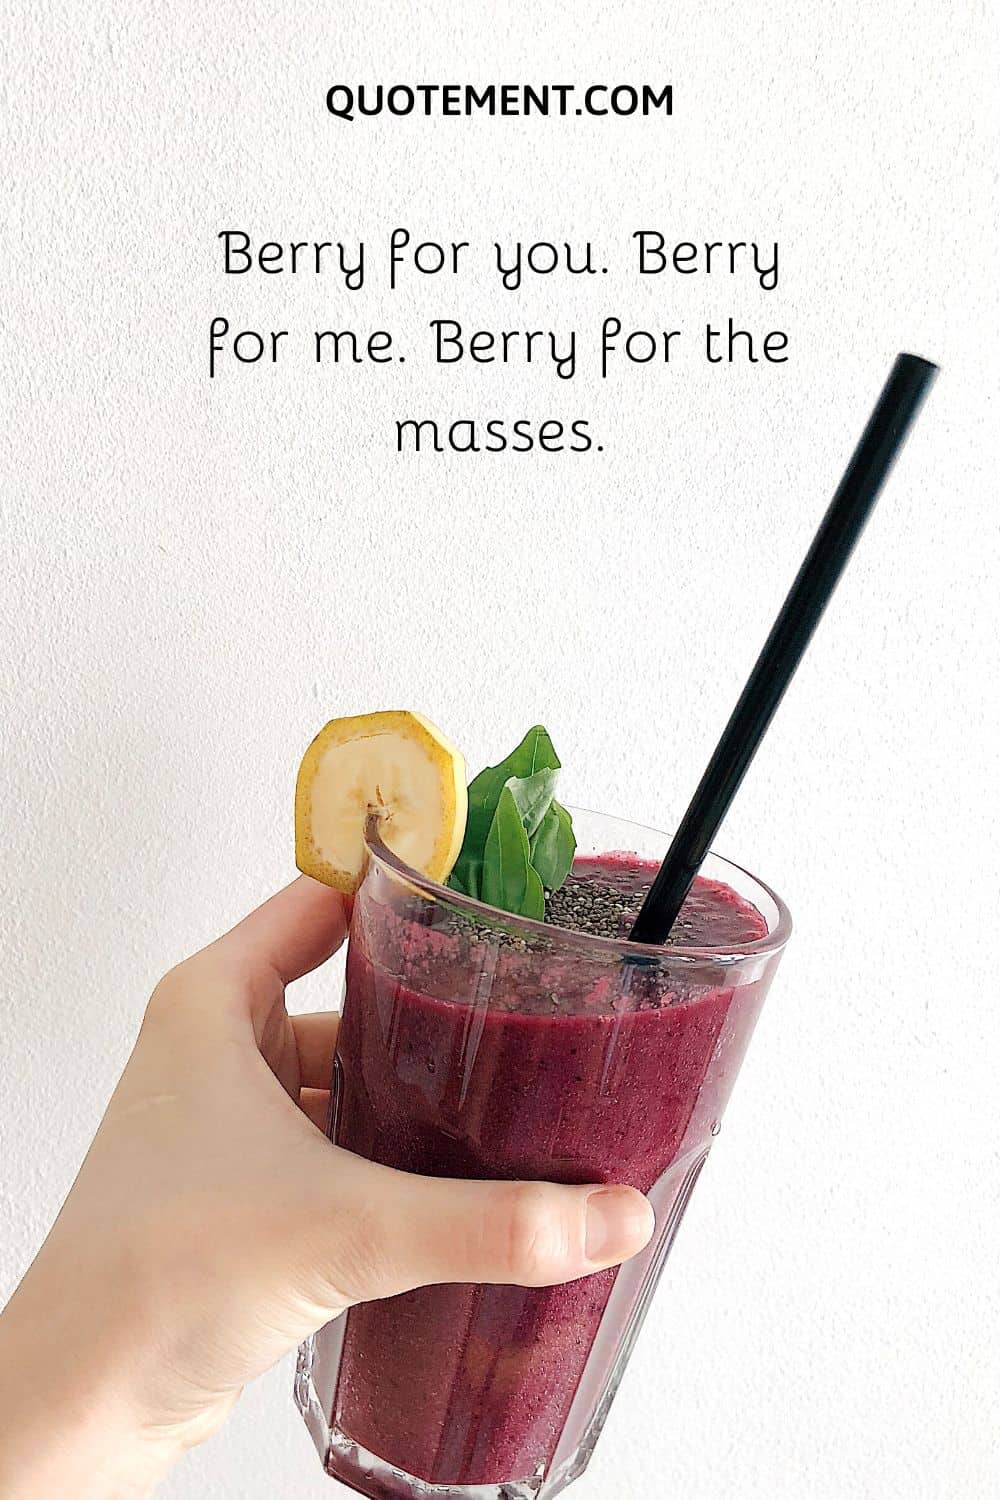 Berry for you. Berry for me. Berry for the masses.